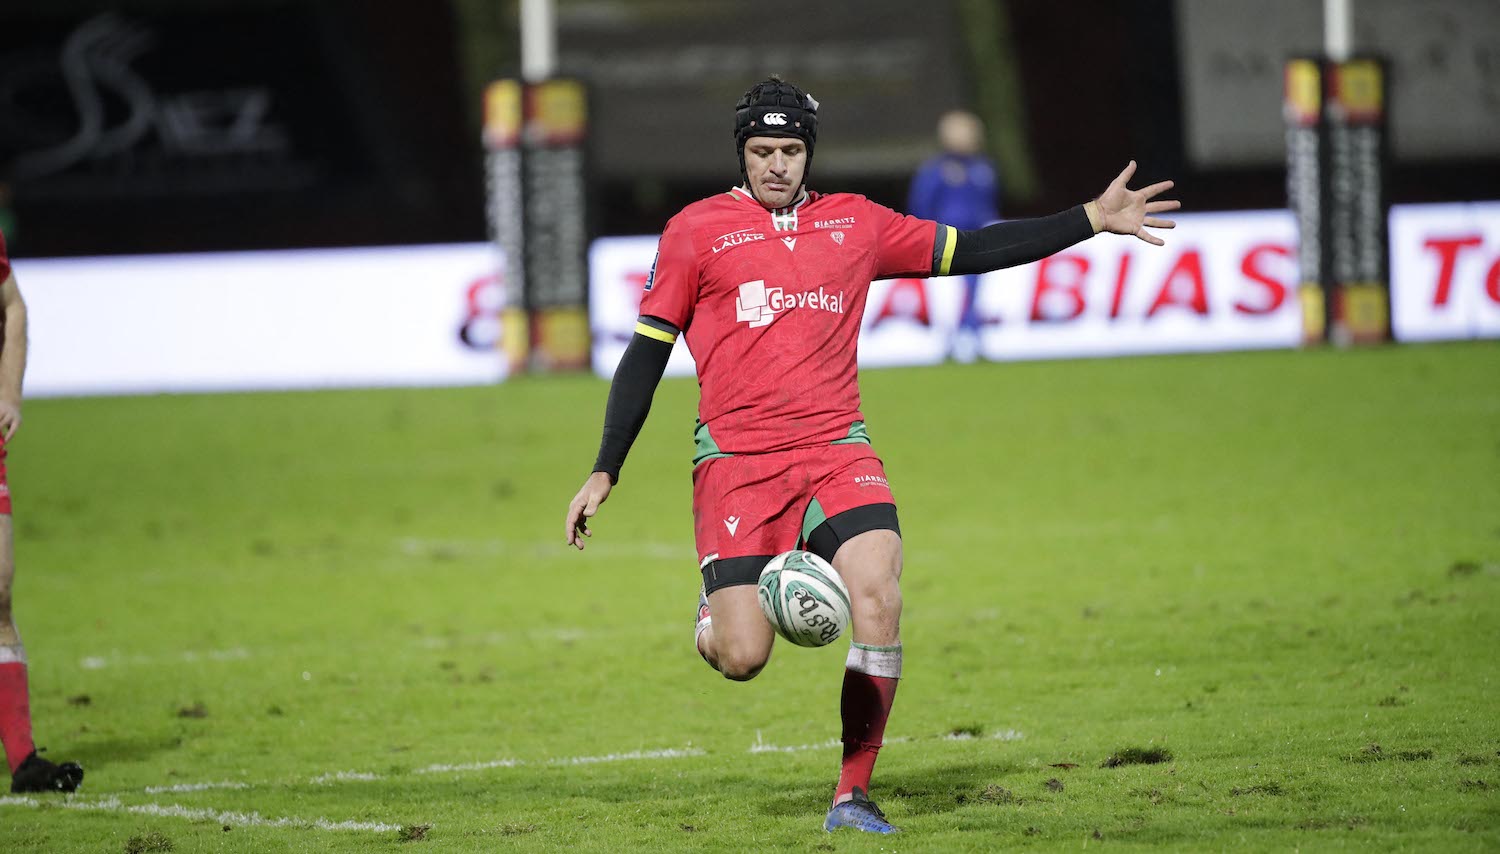 PRO D2 | BIARRITZ OLYMPIQUE PB - PROVENCE RUGBY : 19-12